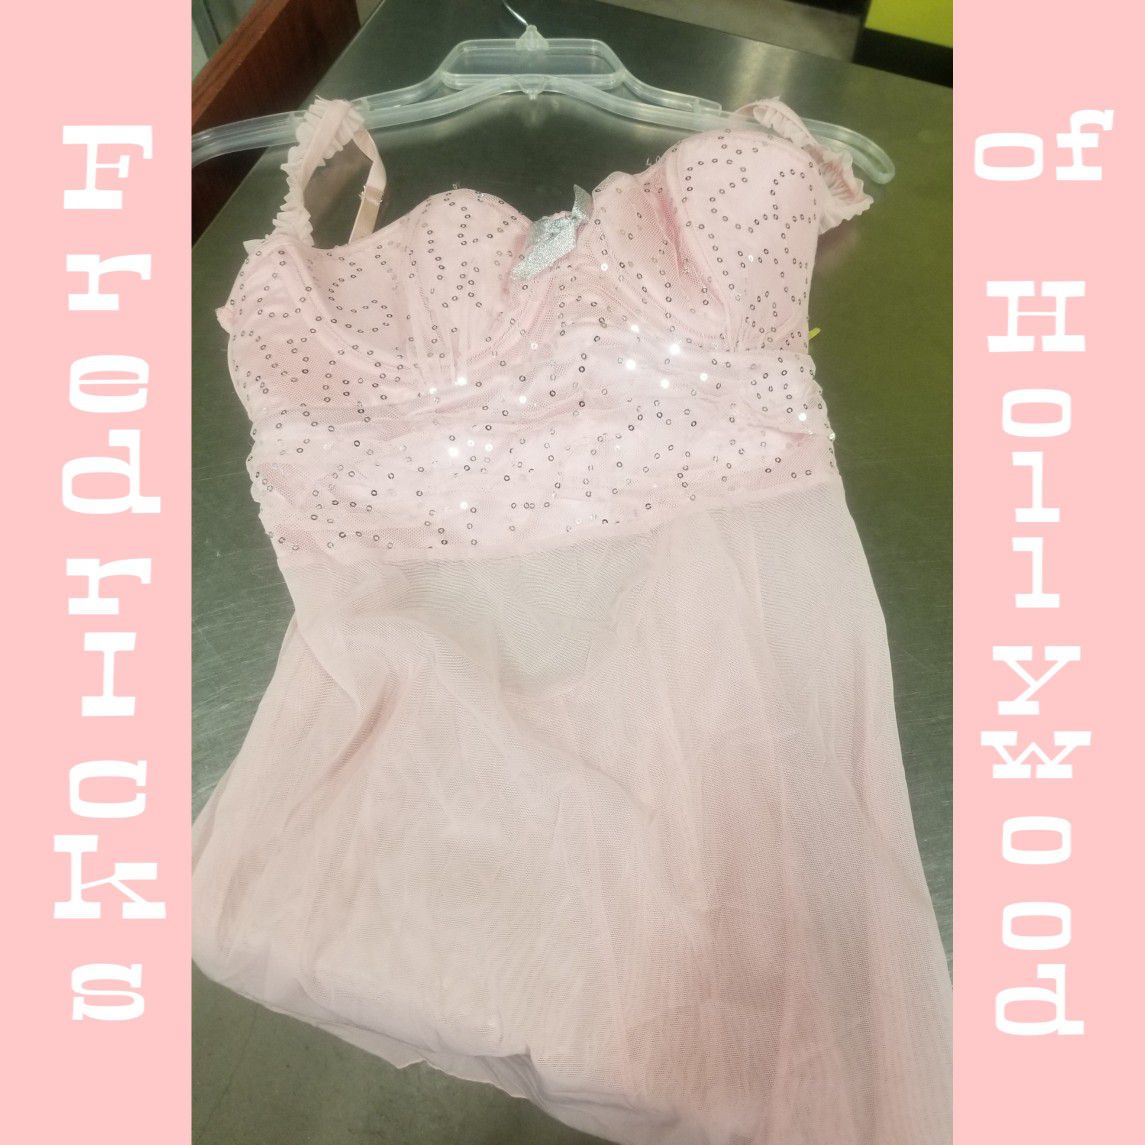 Fredrick of Holiday med pink bling and sheer nighty